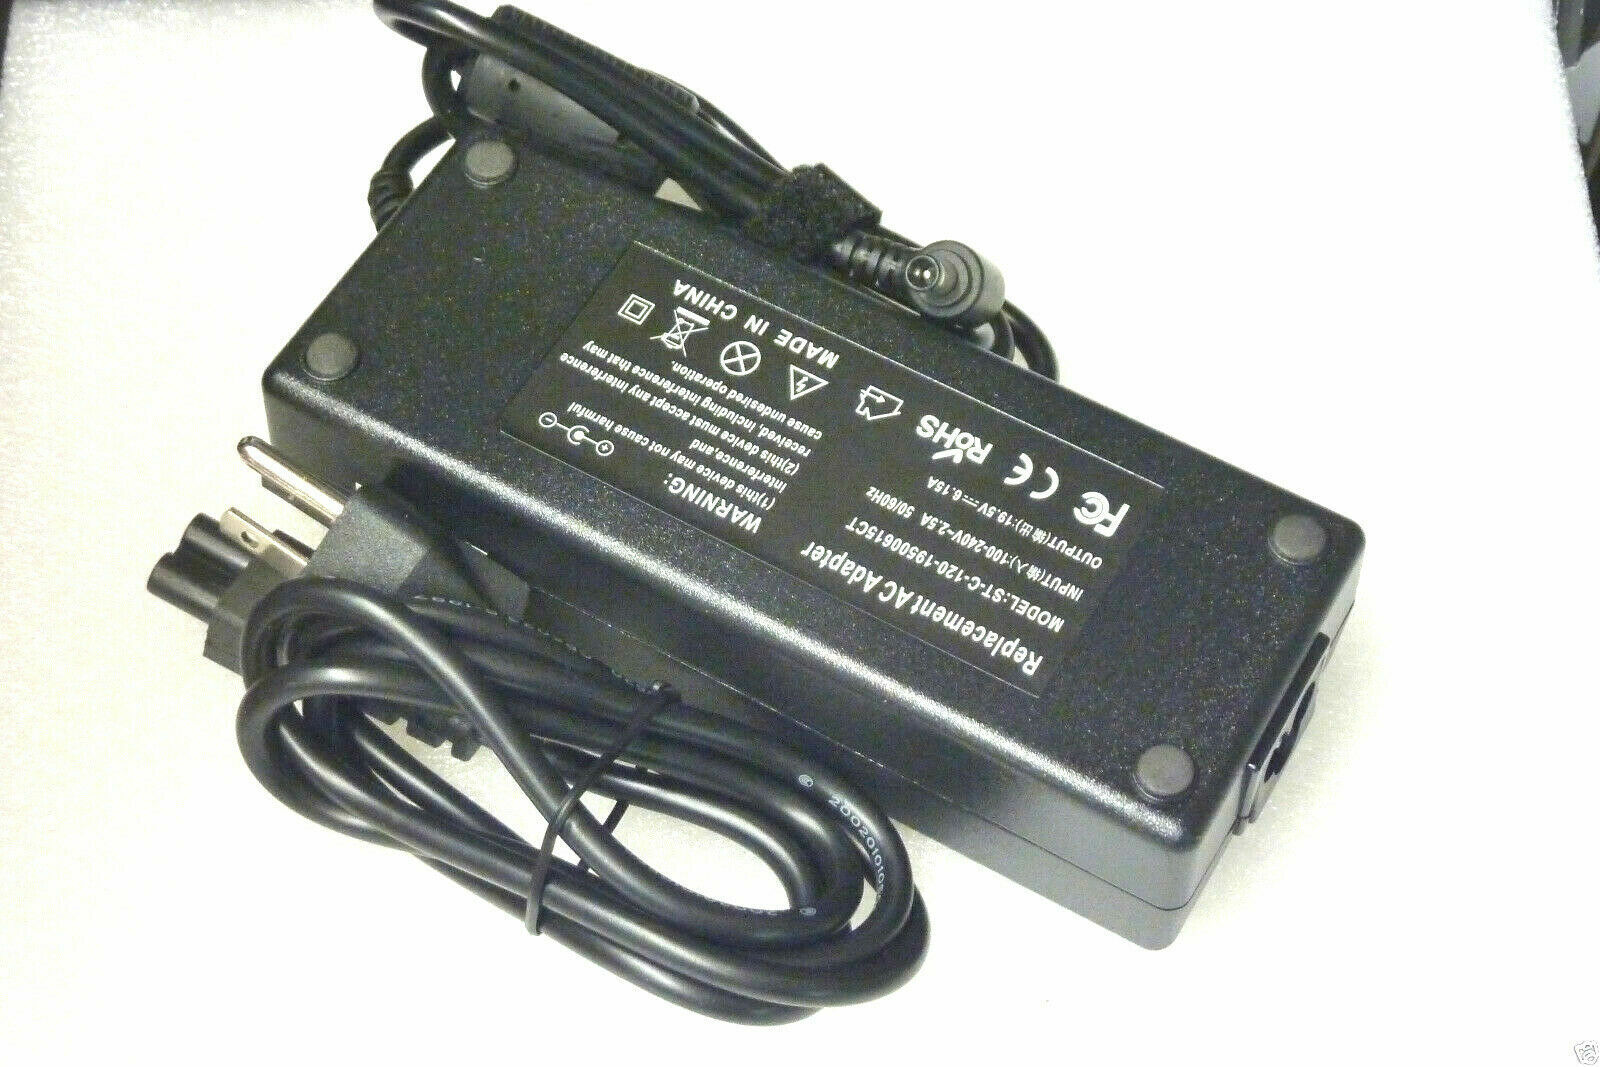 AC Adapter For LG 27GN950-B 27GN95B-B 27GR95QE-B Gaming Monitor Charger Power